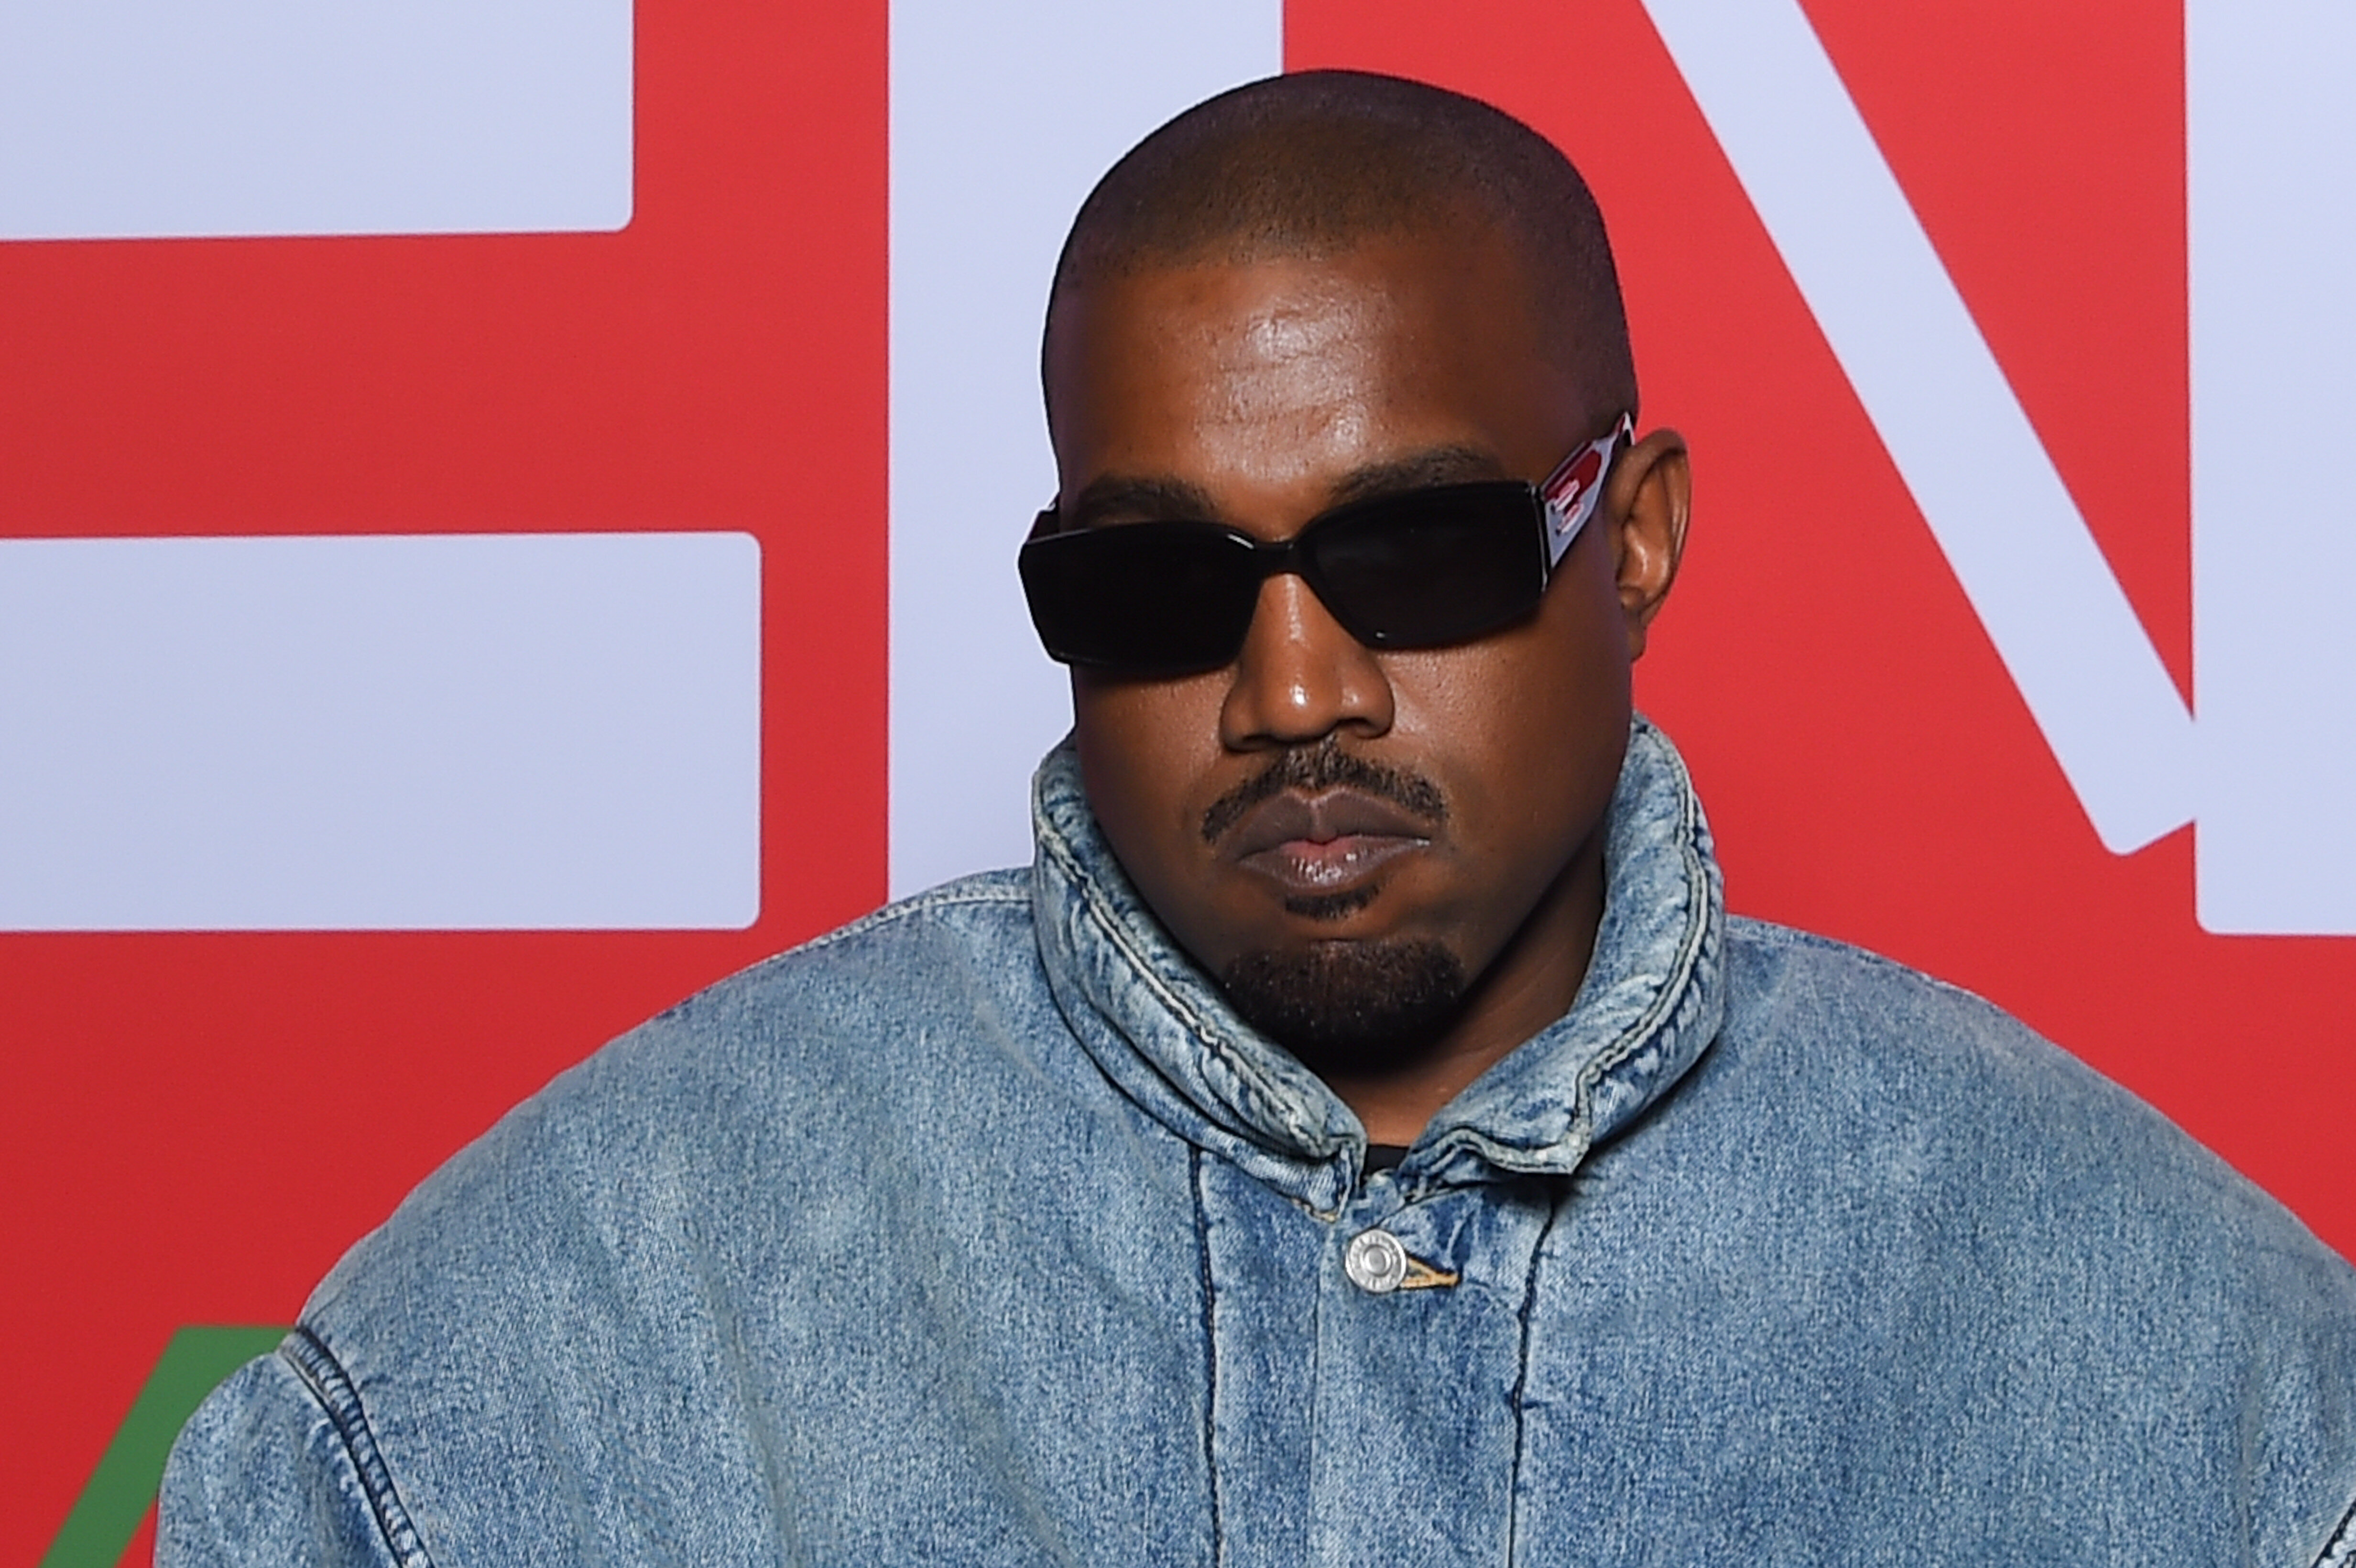 Kanye West Suspended From Instagram Following Online Attacks HuffPost UK Entertainment pic